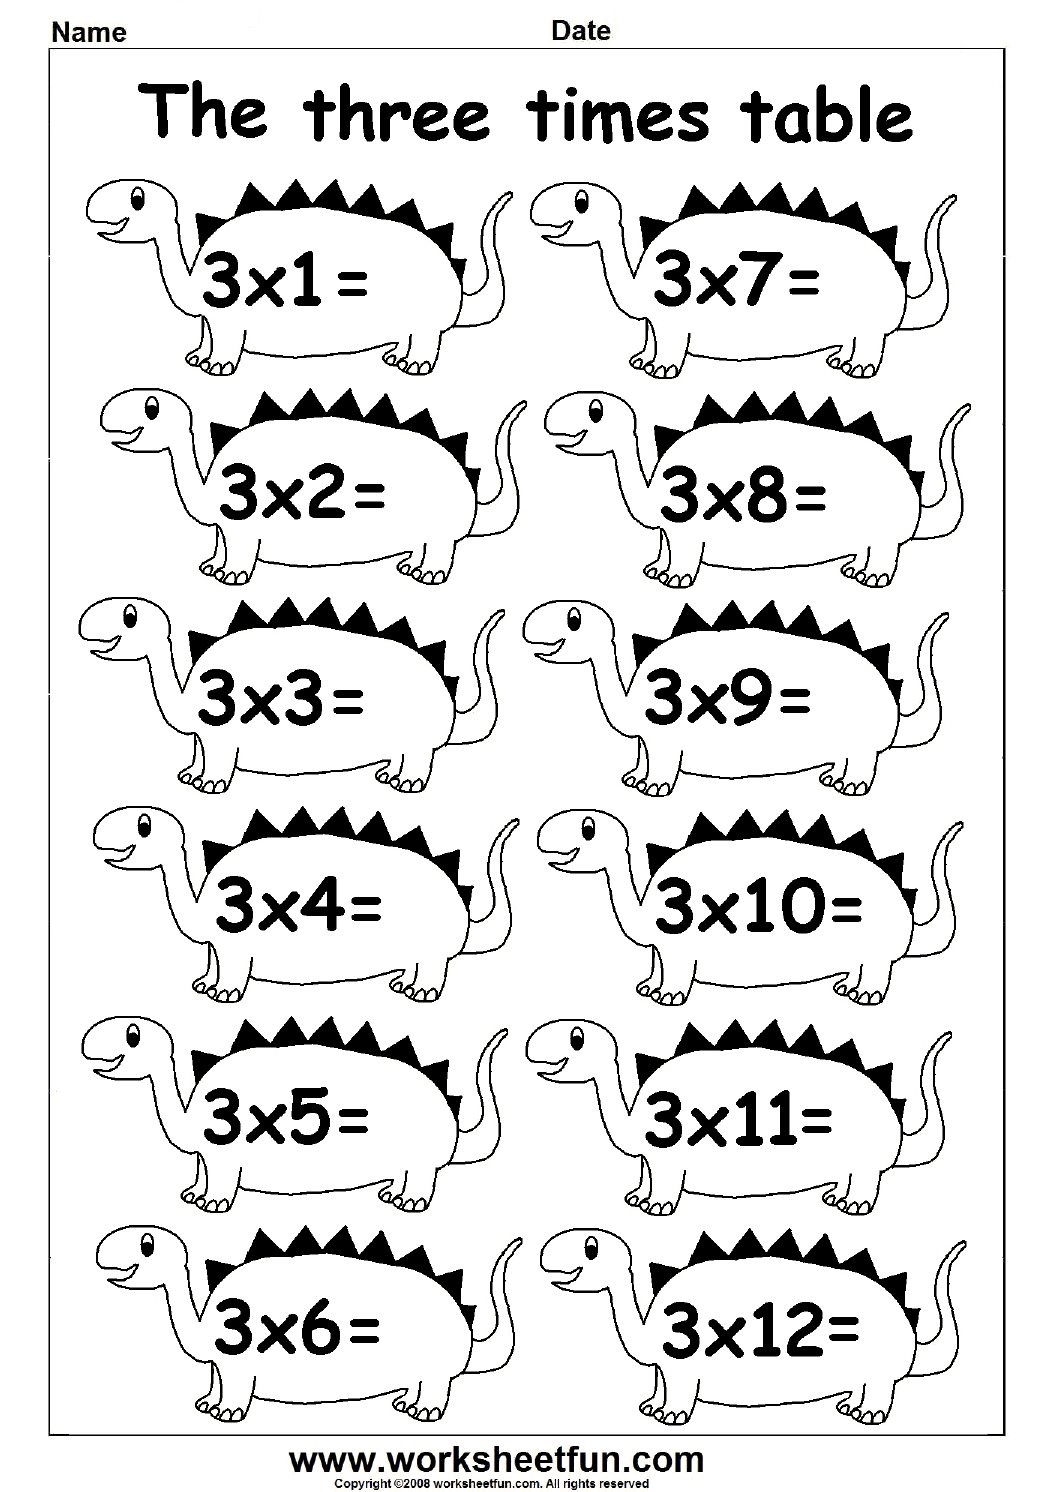 Multiplication Times Tables Worksheets – 2, 3, 4 &amp; 5 Times in Connect 4 Multiplication Printable